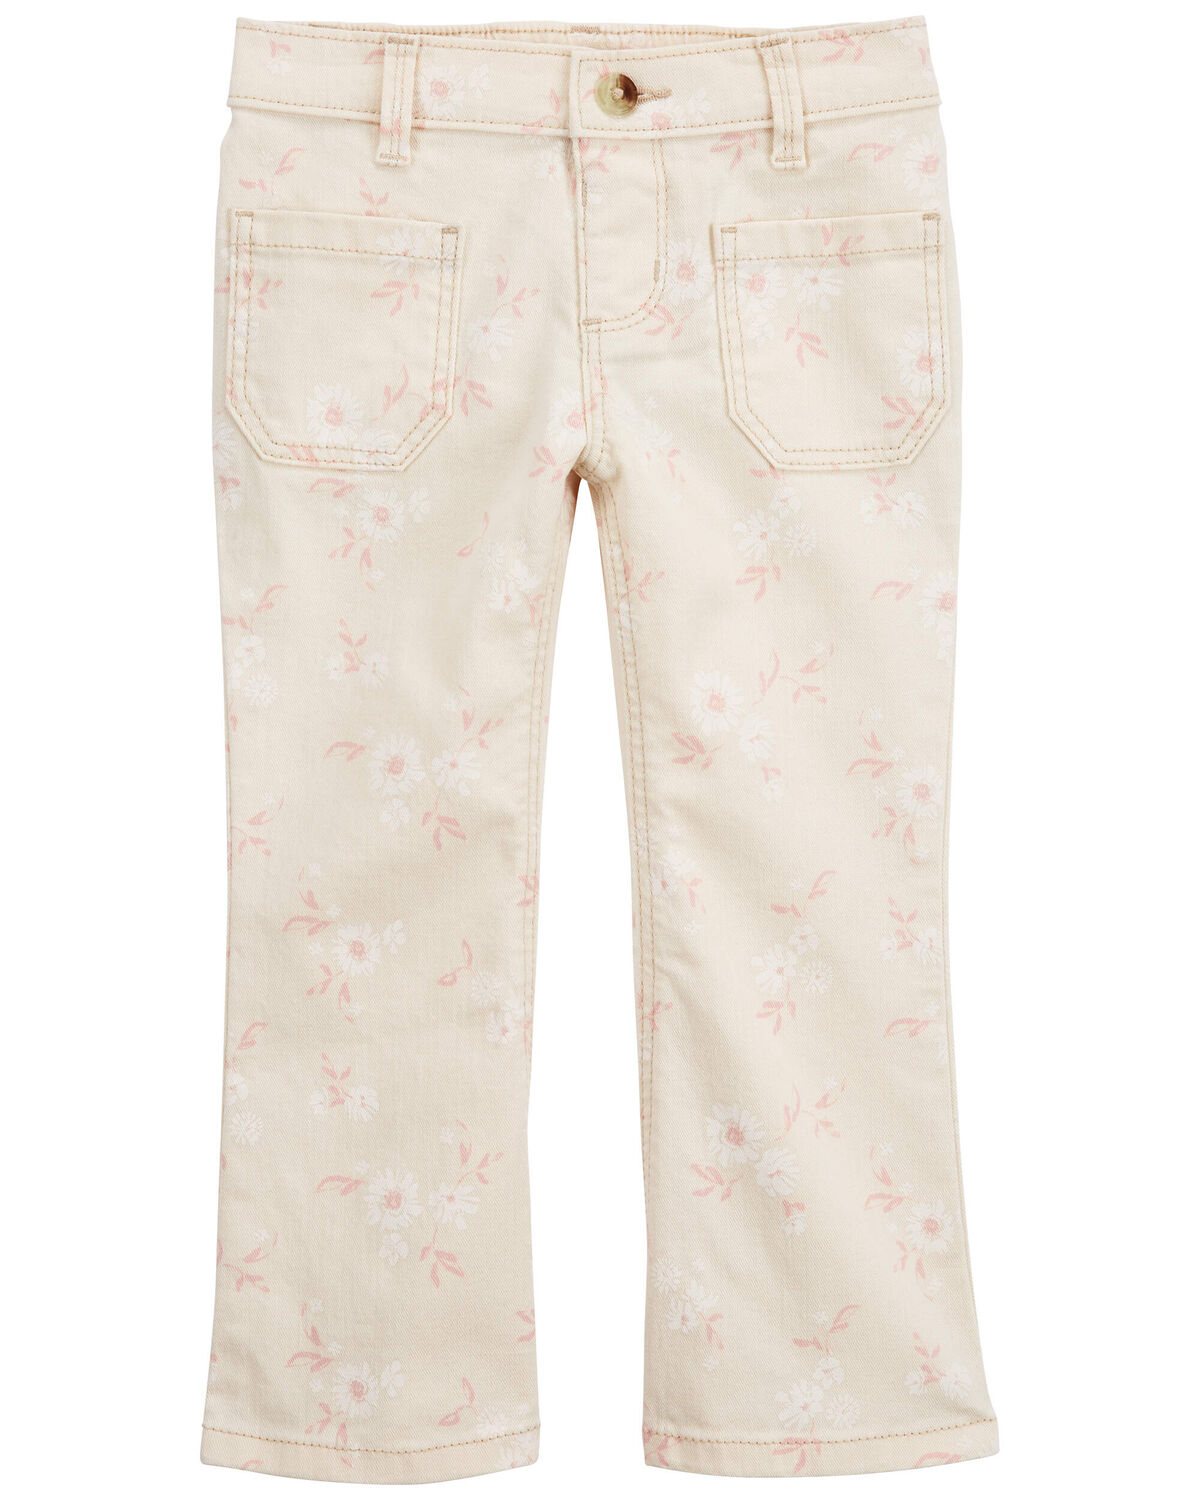 Patterned twill trousers - Cream/Butterflies - Ladies